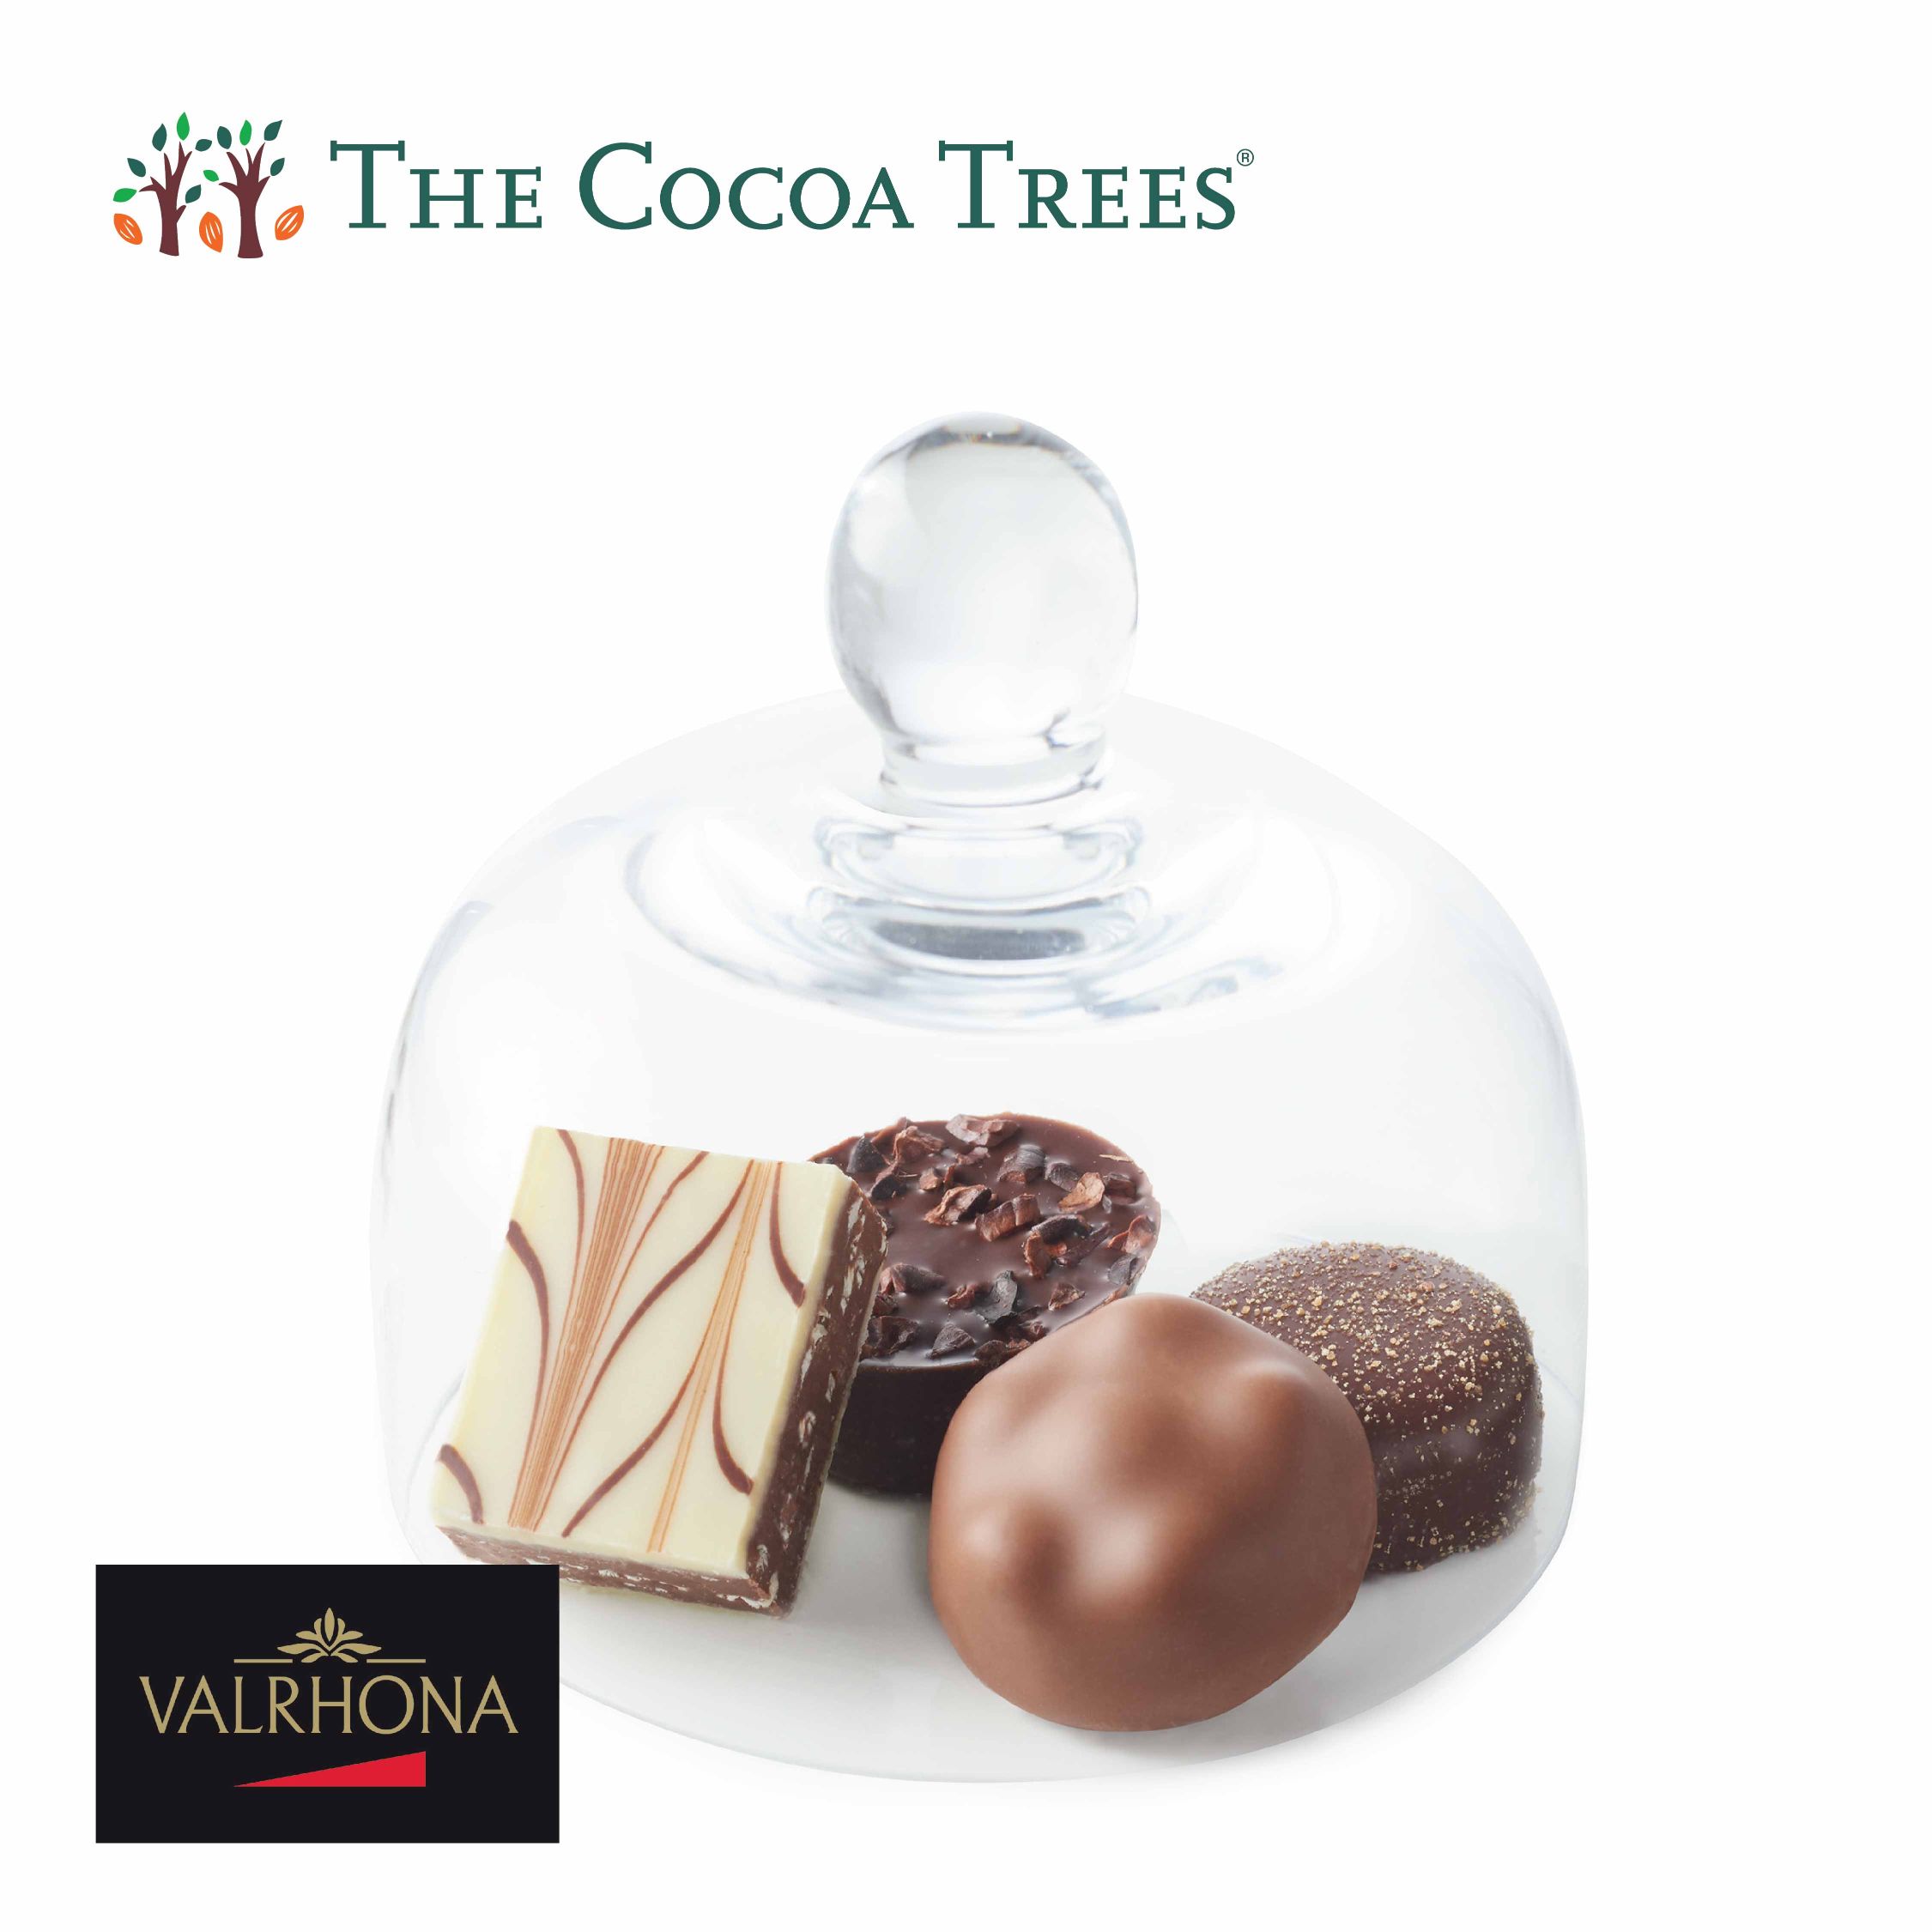 The Cocoa Trees (Jurong Point) - Dine, Shop, Earn